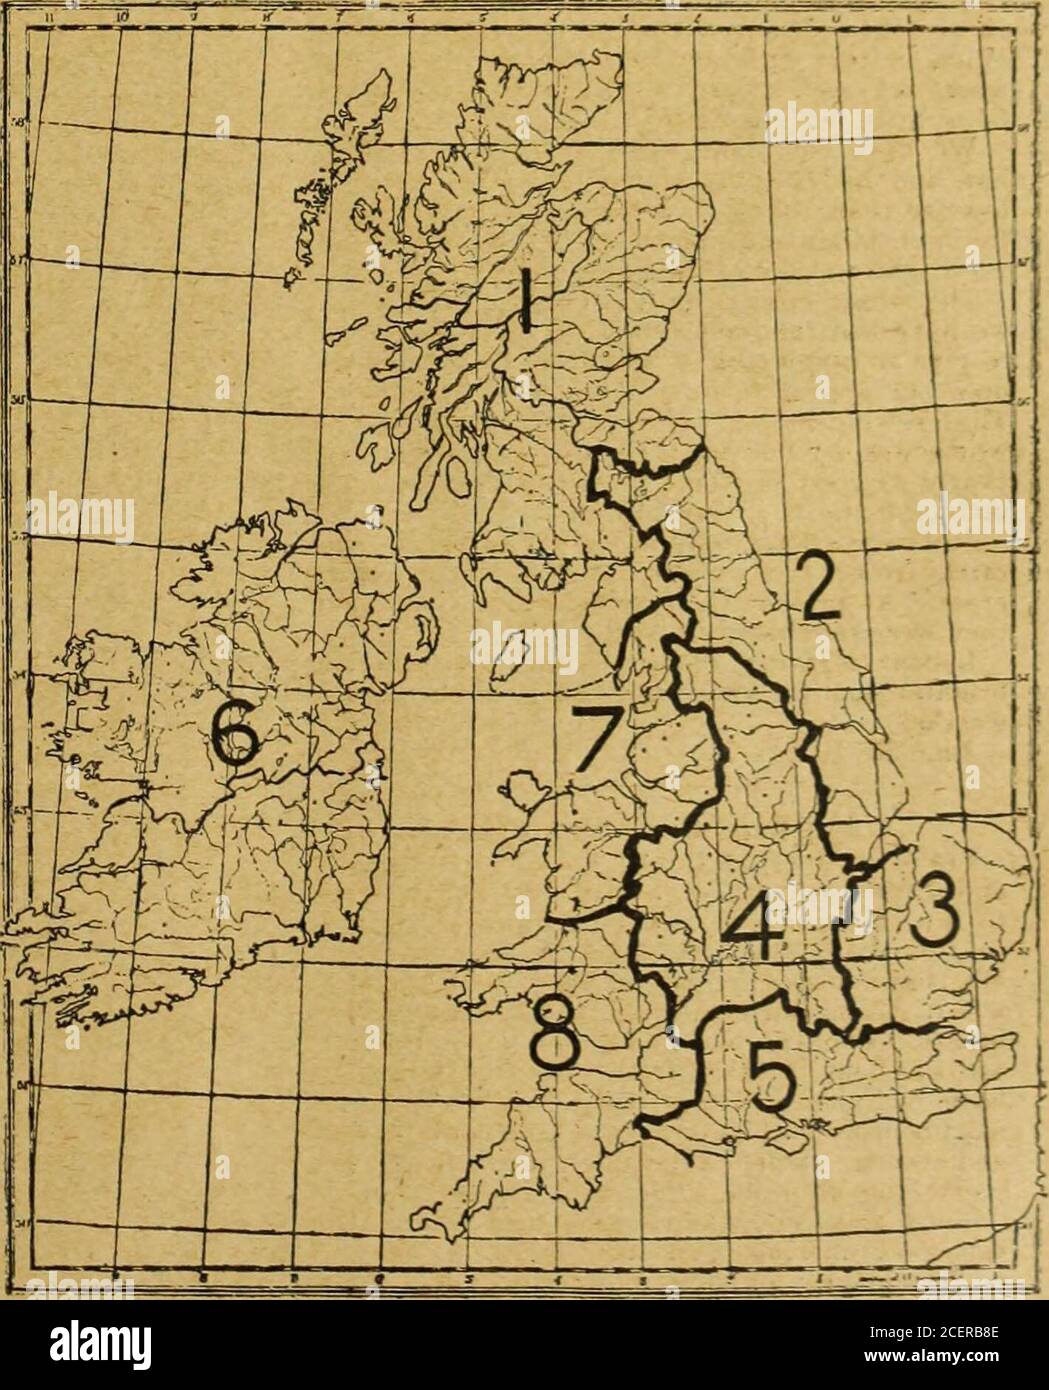 . The Mark Lane express, agricultural journal &c. Where the winds are not alluded to in the local predictions, they may be taken as similar to those given in the general prediction. Map of the British Isles showing groupsof Counties representing the aboveMeteorological Districts. BAROMEl T E R OHART OFFICIAL OBSERVATIONS SUPPLTEDBY THE METEOROLOGICAL OFFICEFOR WEEK ENDING JULY 10, LONDON.READINGS TAKEN EACH DAY AT 8 a.m. &gt;- &gt;a DC a uoz&lt;ru o BAROMETERINCHES 3I.09B765432I 30098765432I 29.098765432I 28.0 5o 5 o LXJ z UJ 3= incc 3 &lt; to 5 a o. Height of Barometer. Tuesday (July i) Wedne Stock Photo